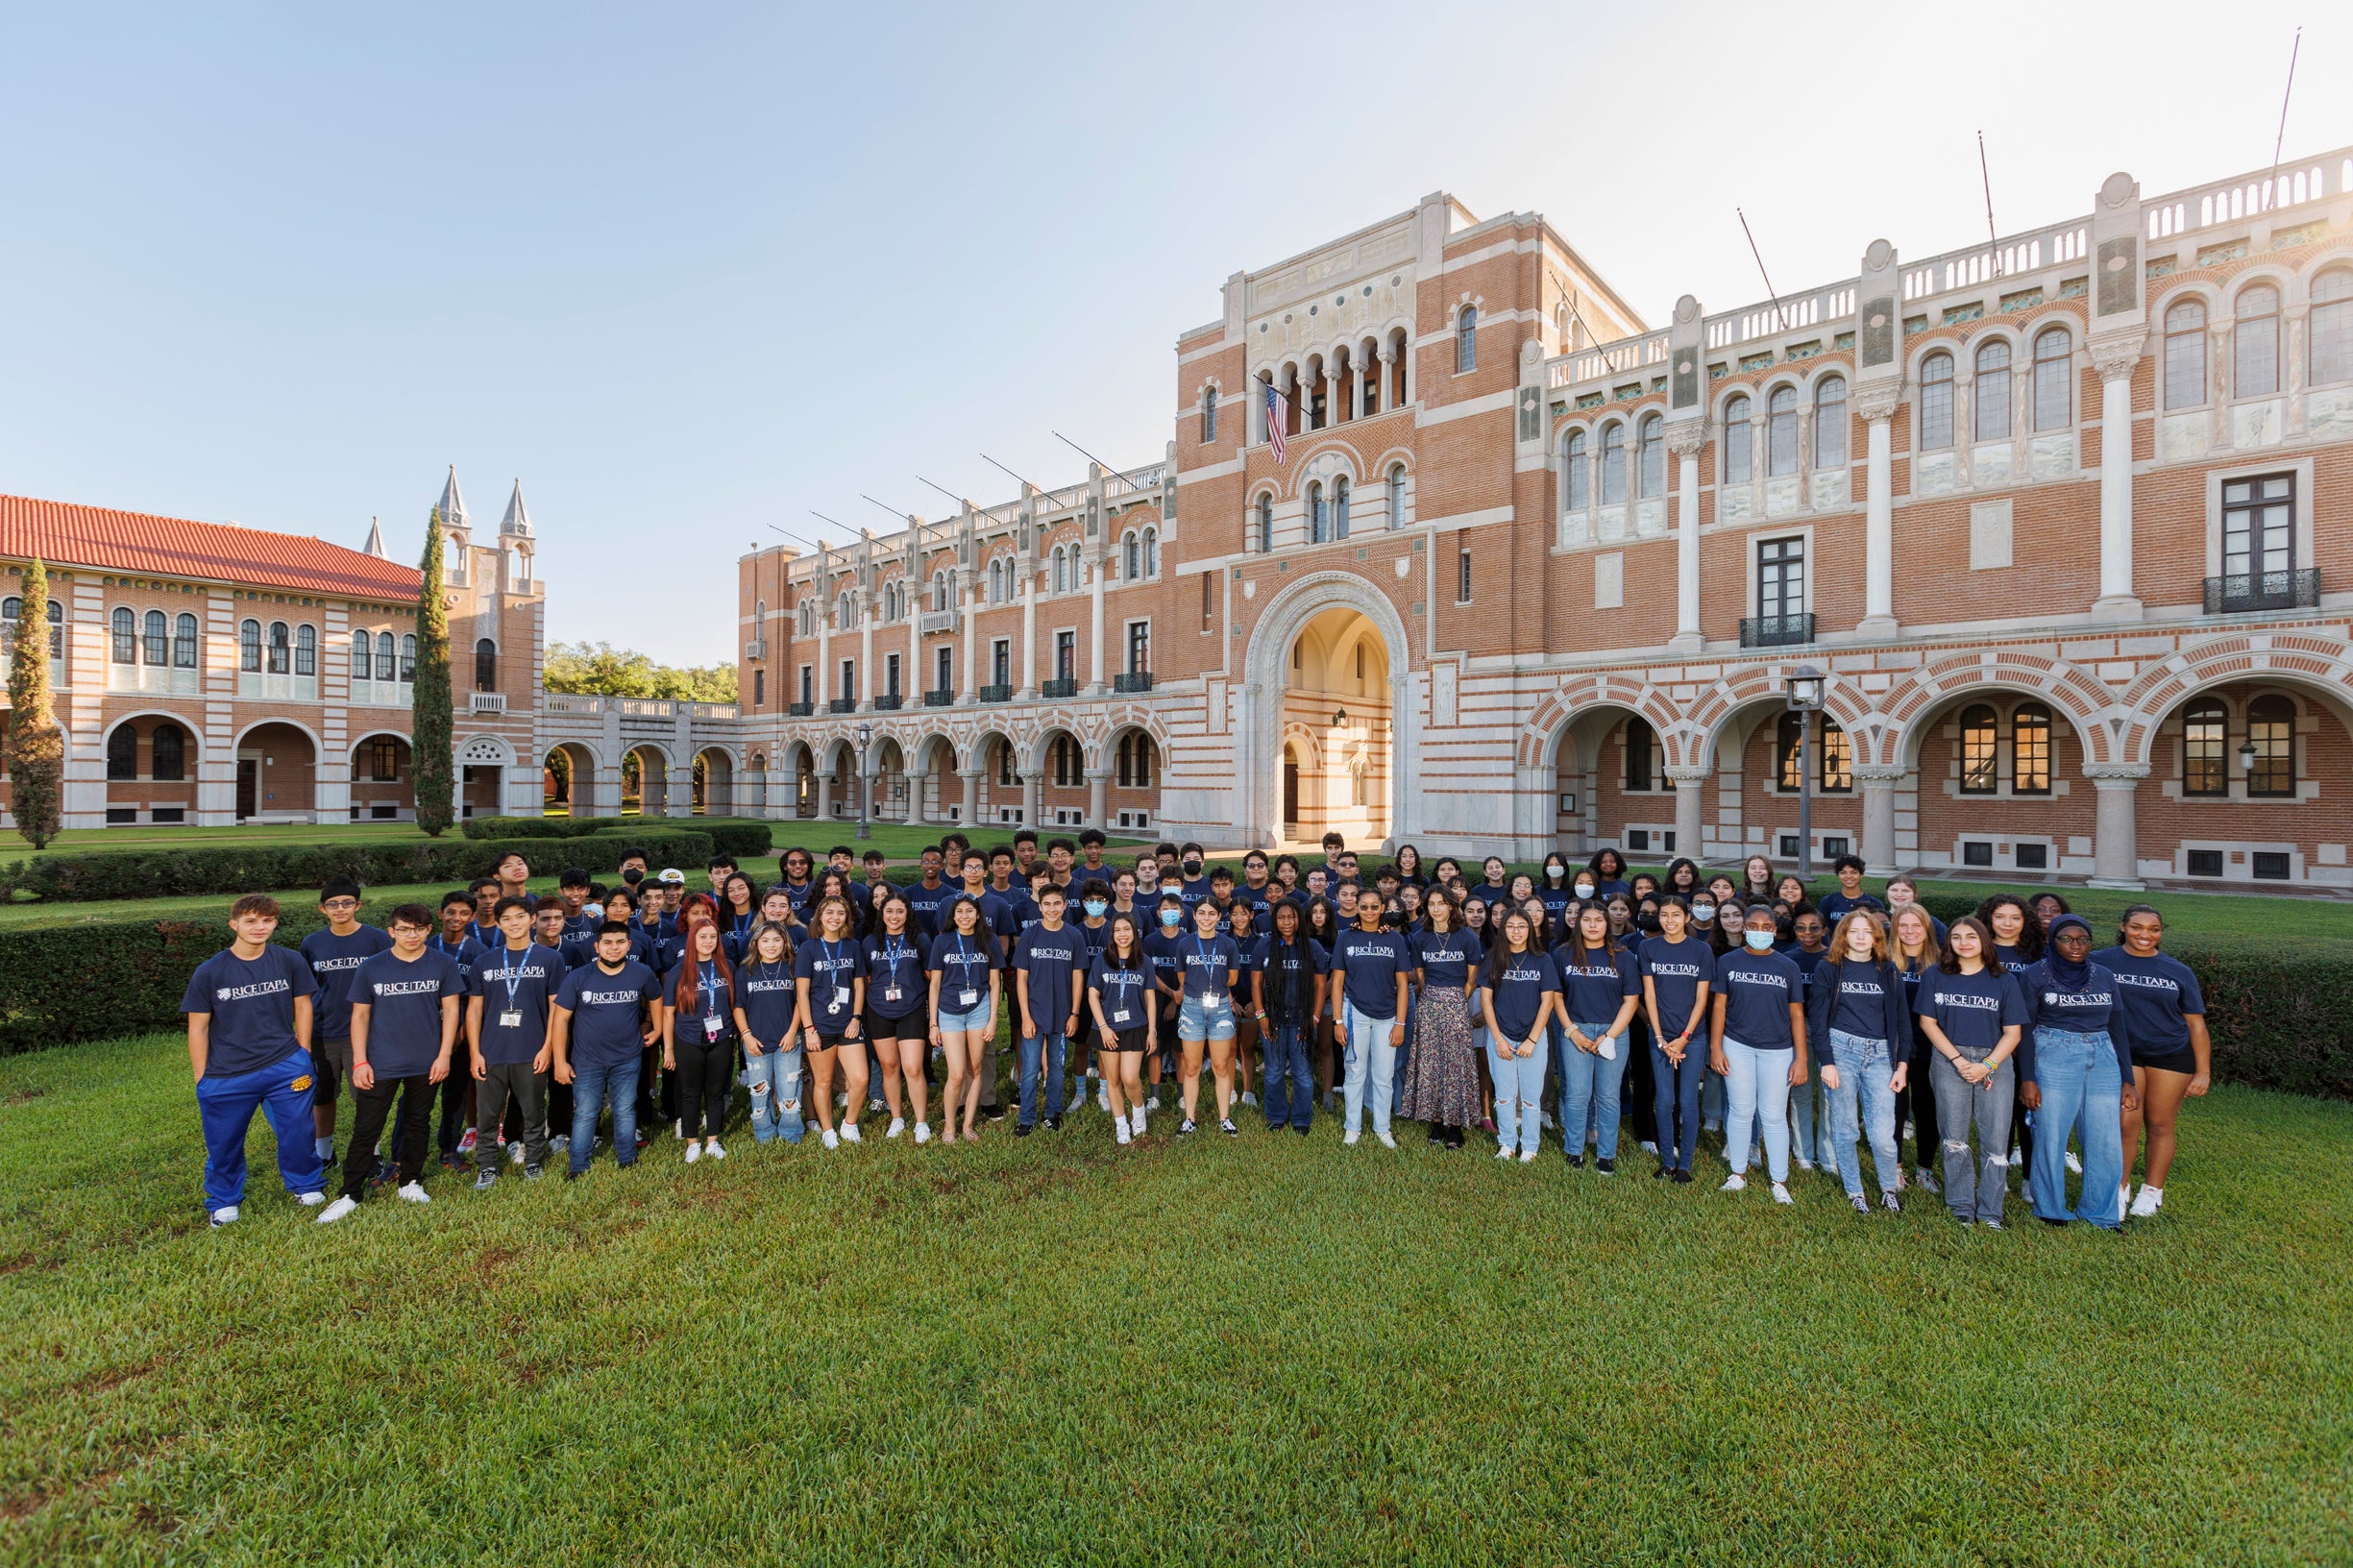 Over 100 Tapia campers pose in front of Lovett Hall on the Rice University campus.